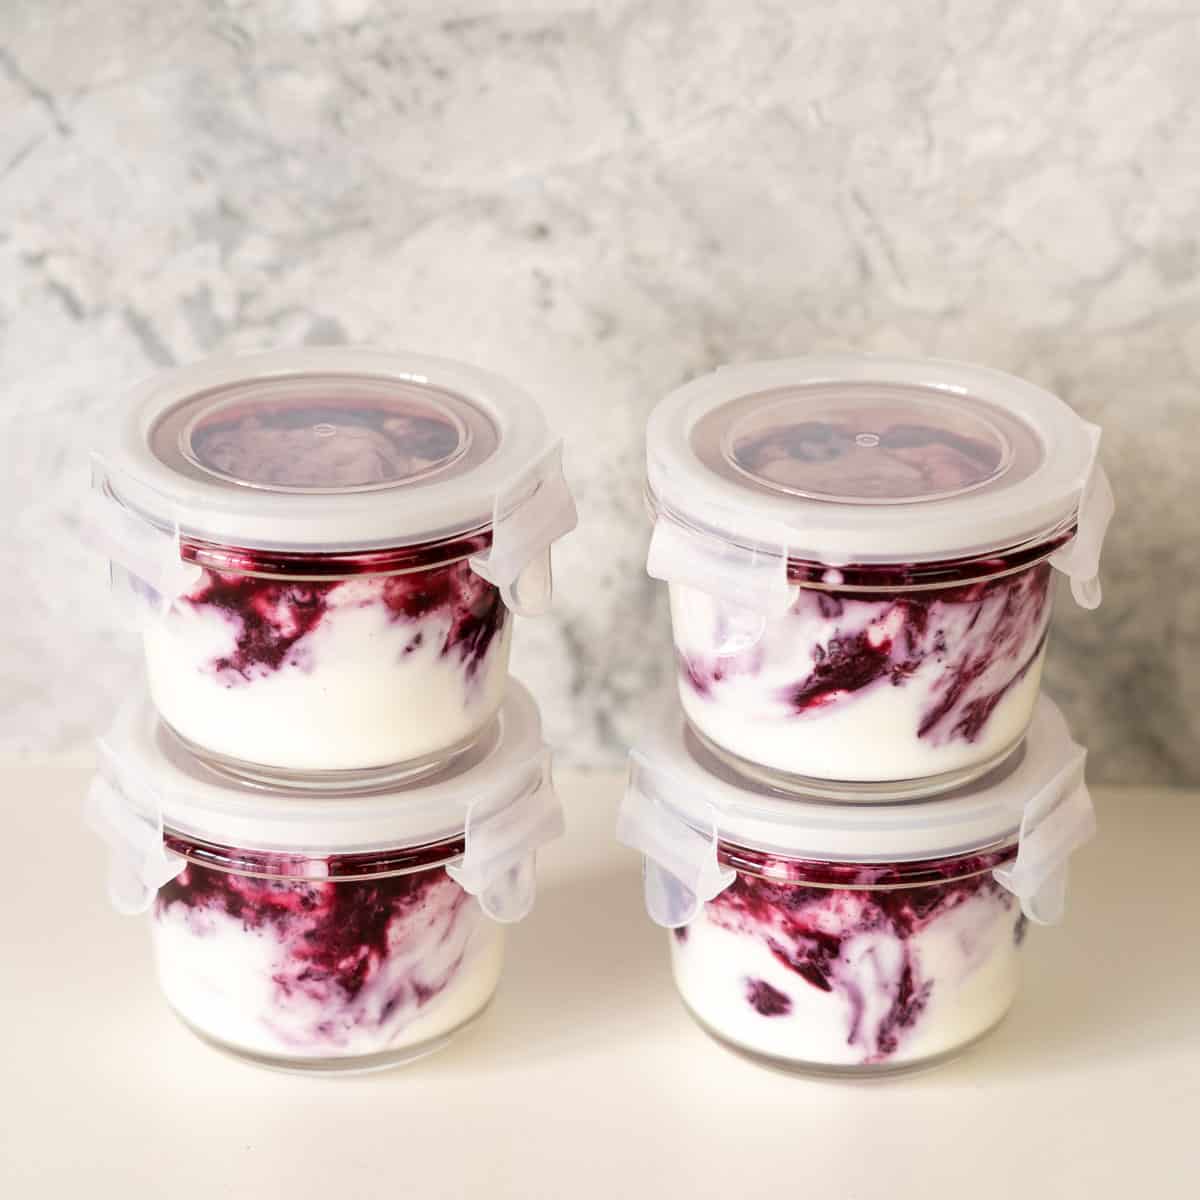 Four glass jars with white lids, filled with layers of blueberries and yogurt on a bench top.